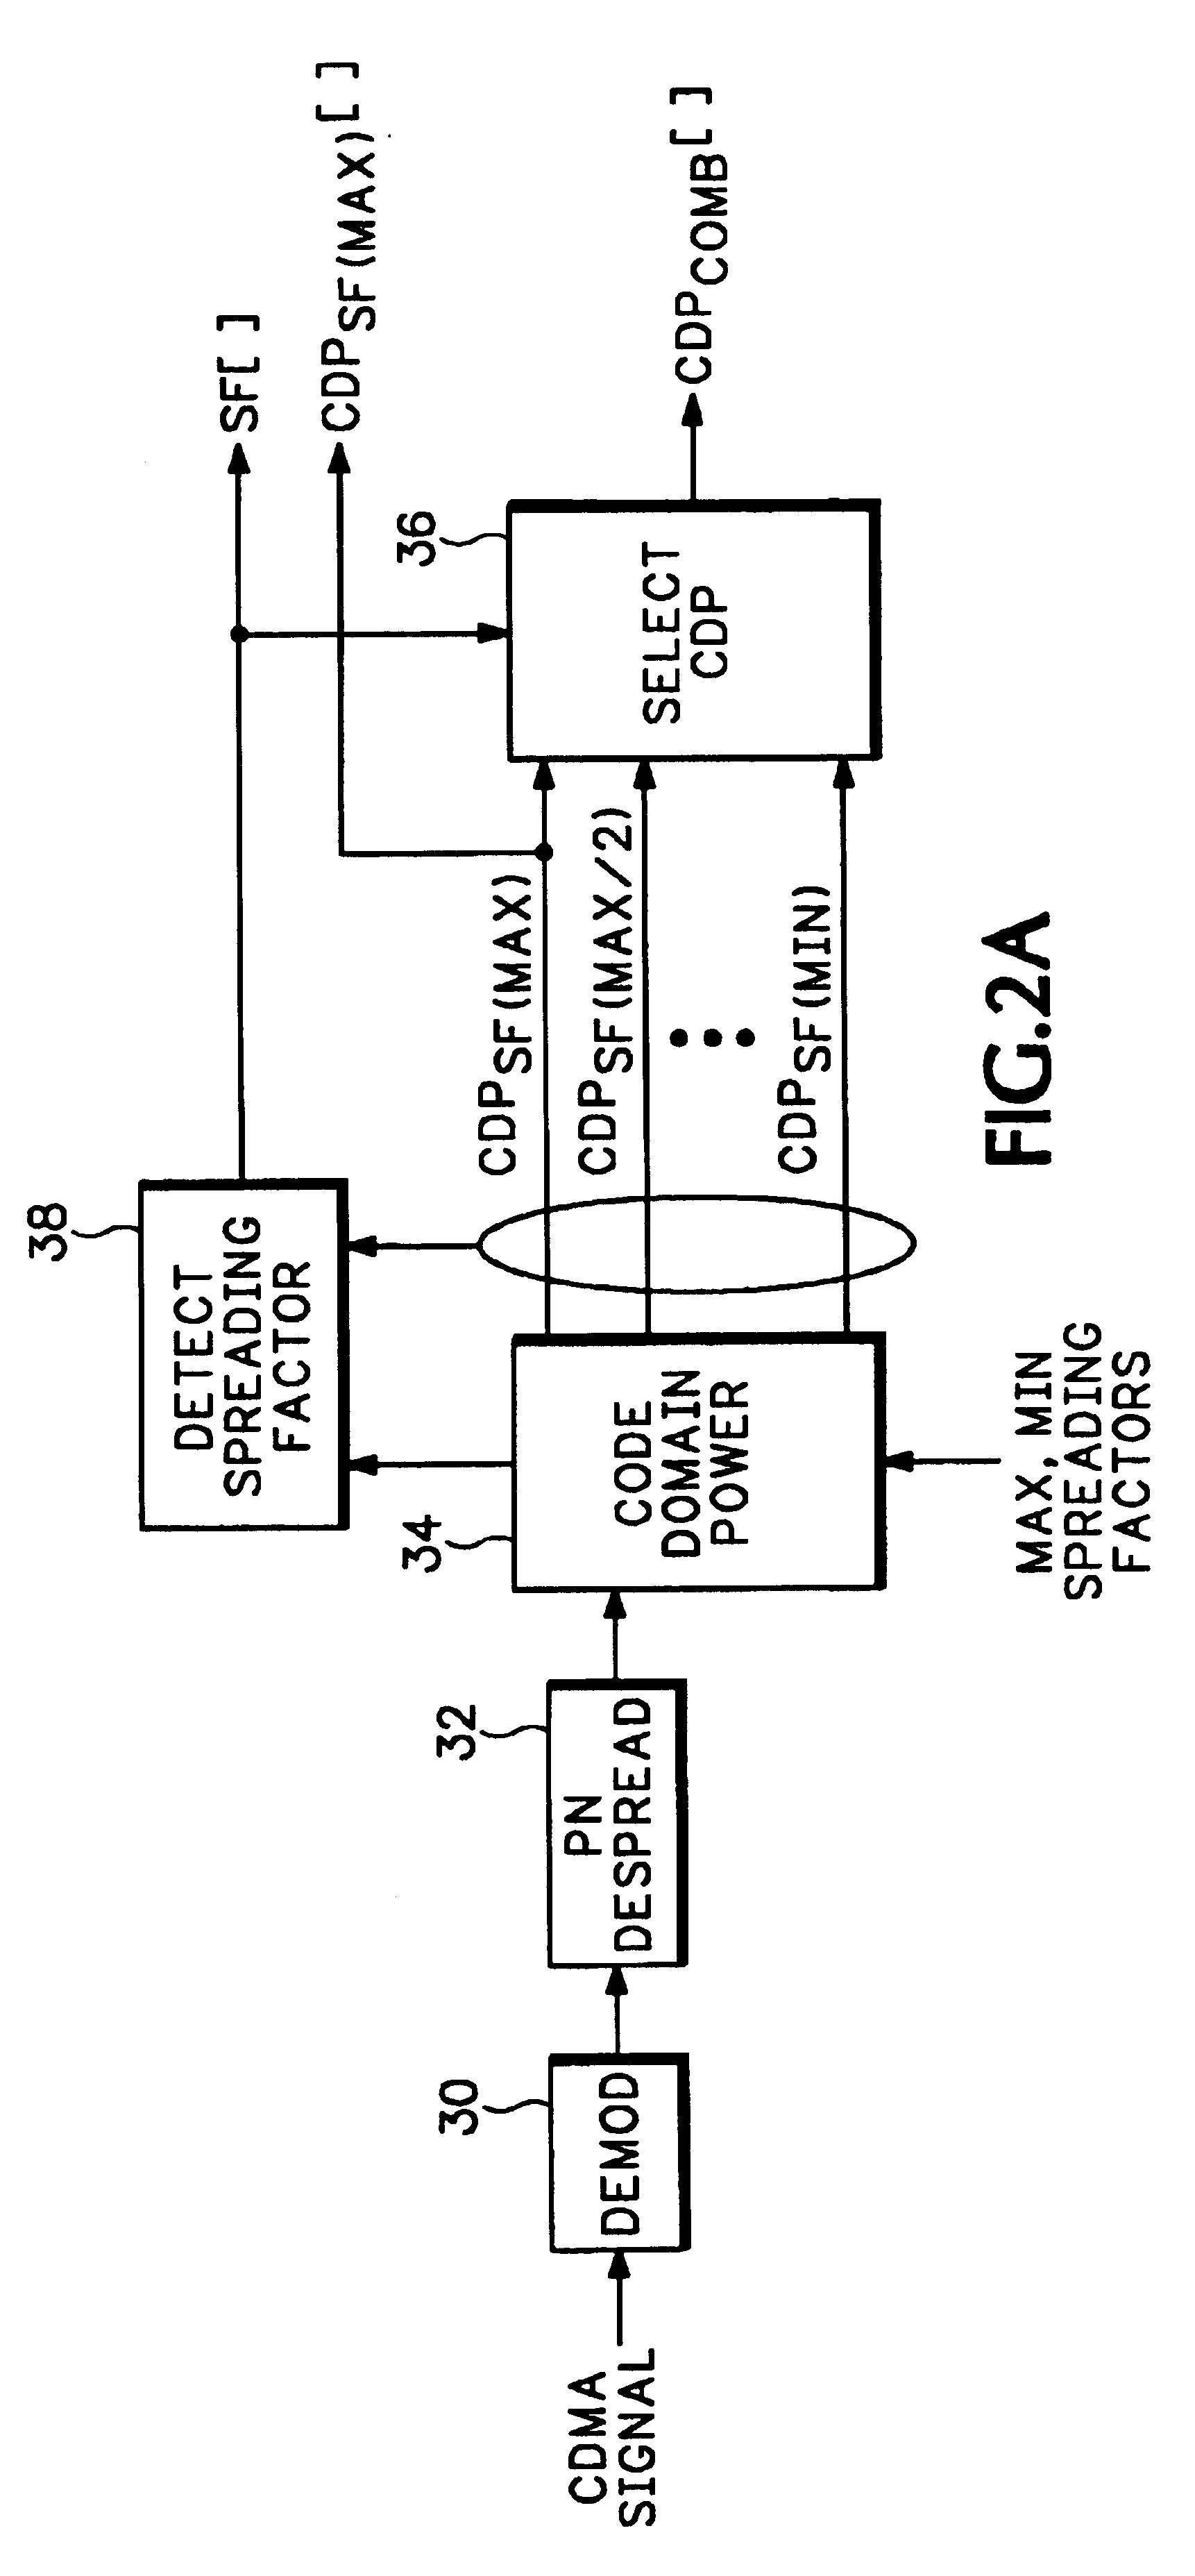 Display of code power levels and relationships of multiple spreading factor orthogonal codes in a CDMA signal